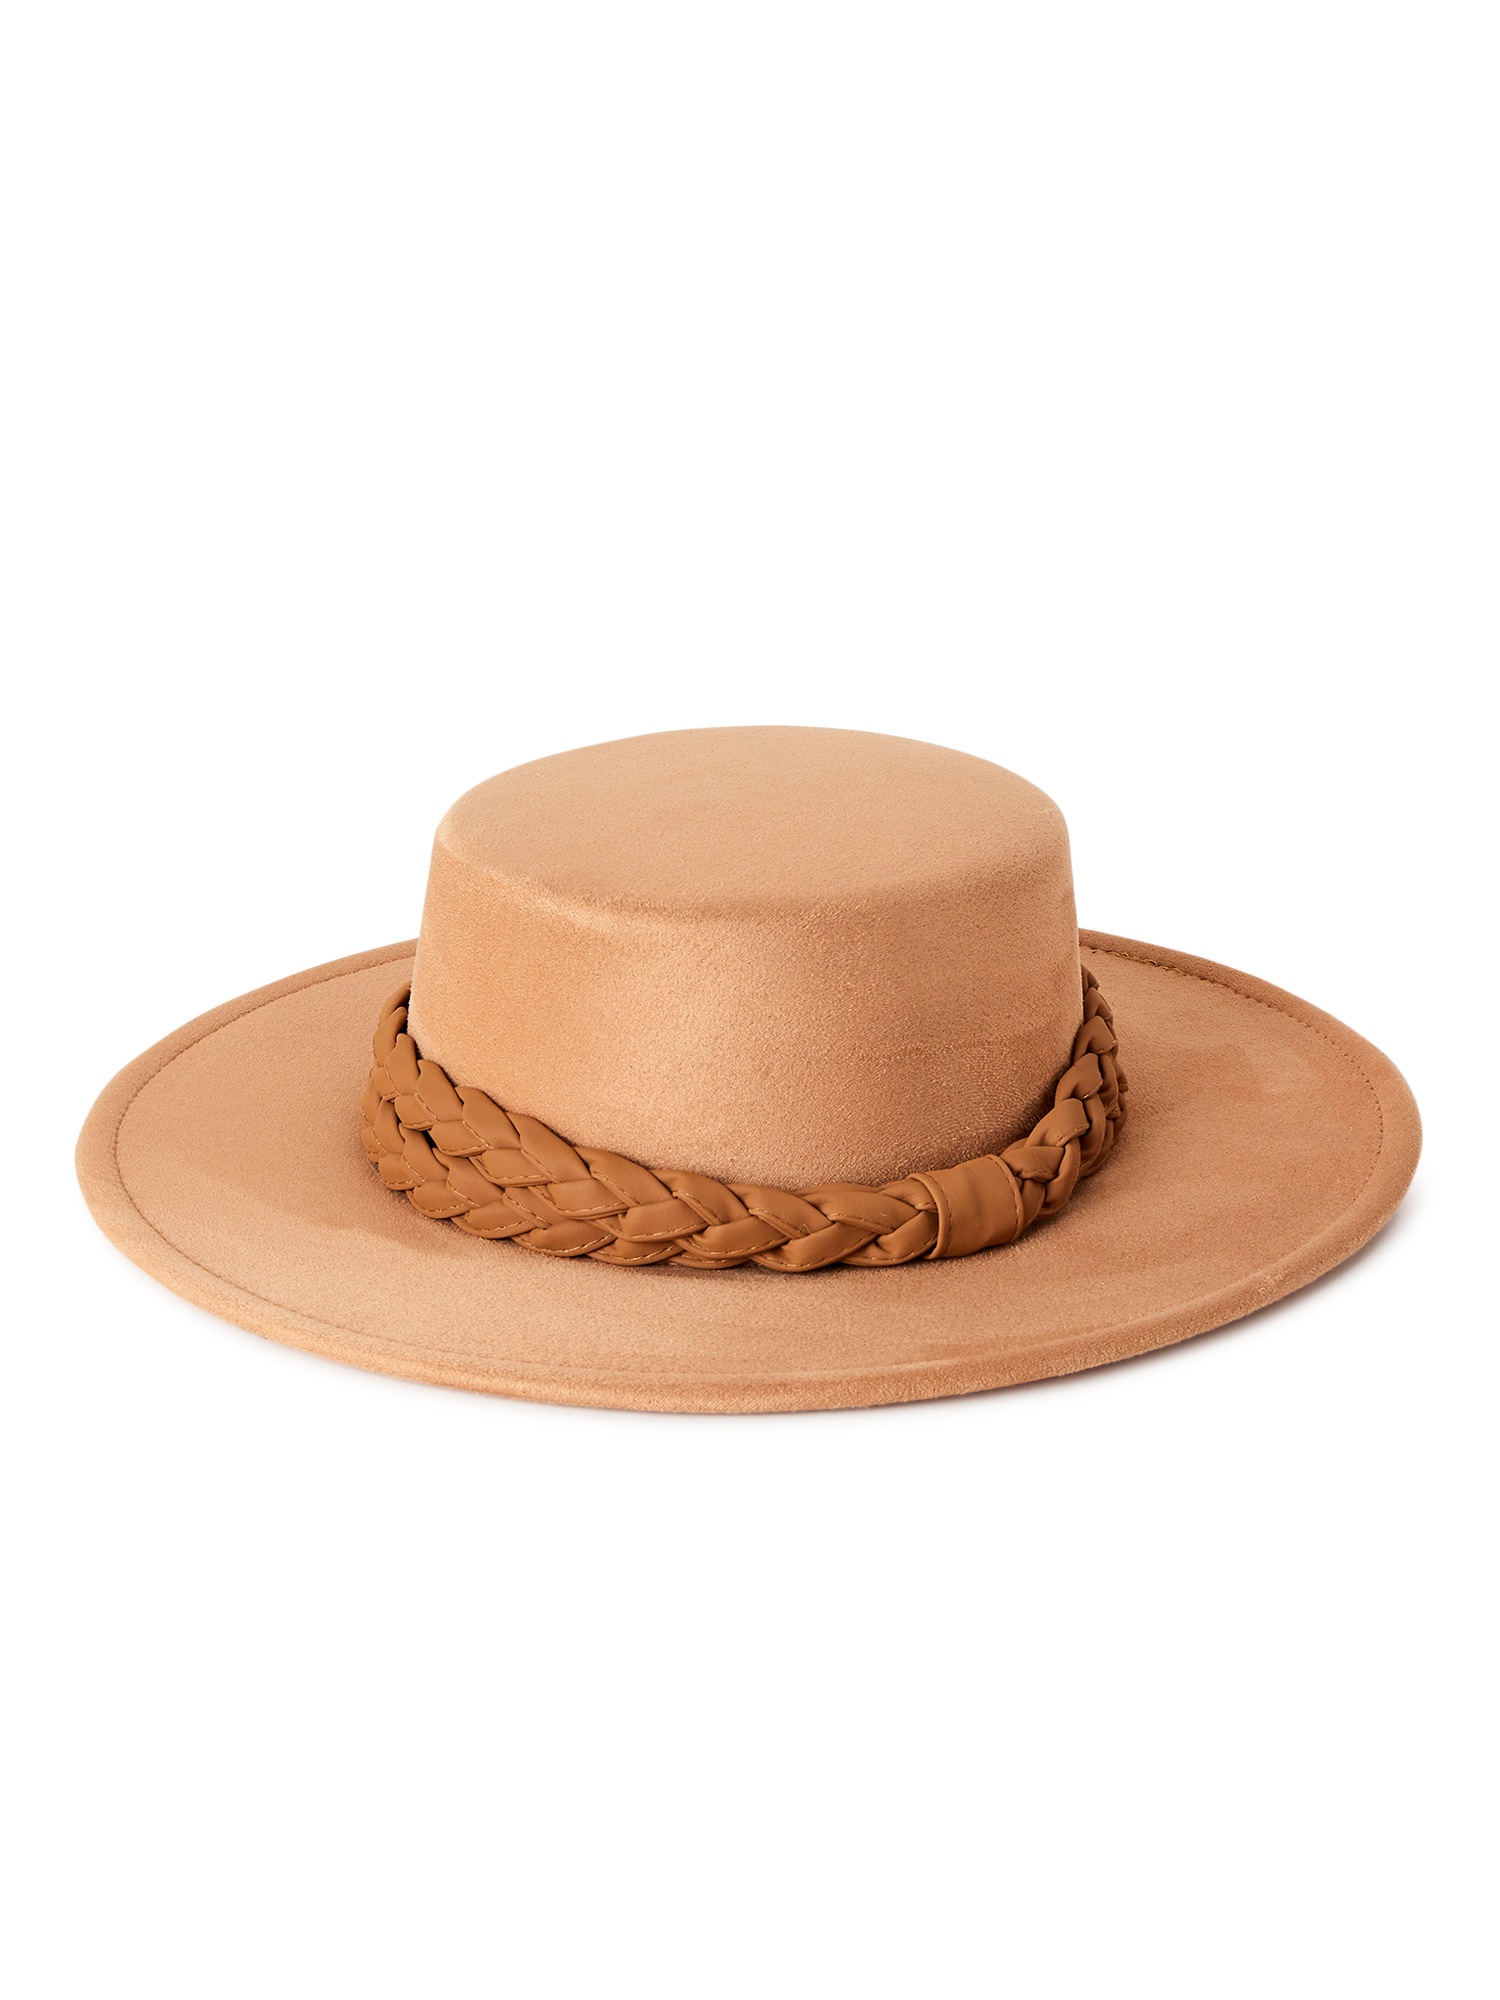 Time and Tru Adult Women's Boater Hat with Braided Trim - image 1 of 3